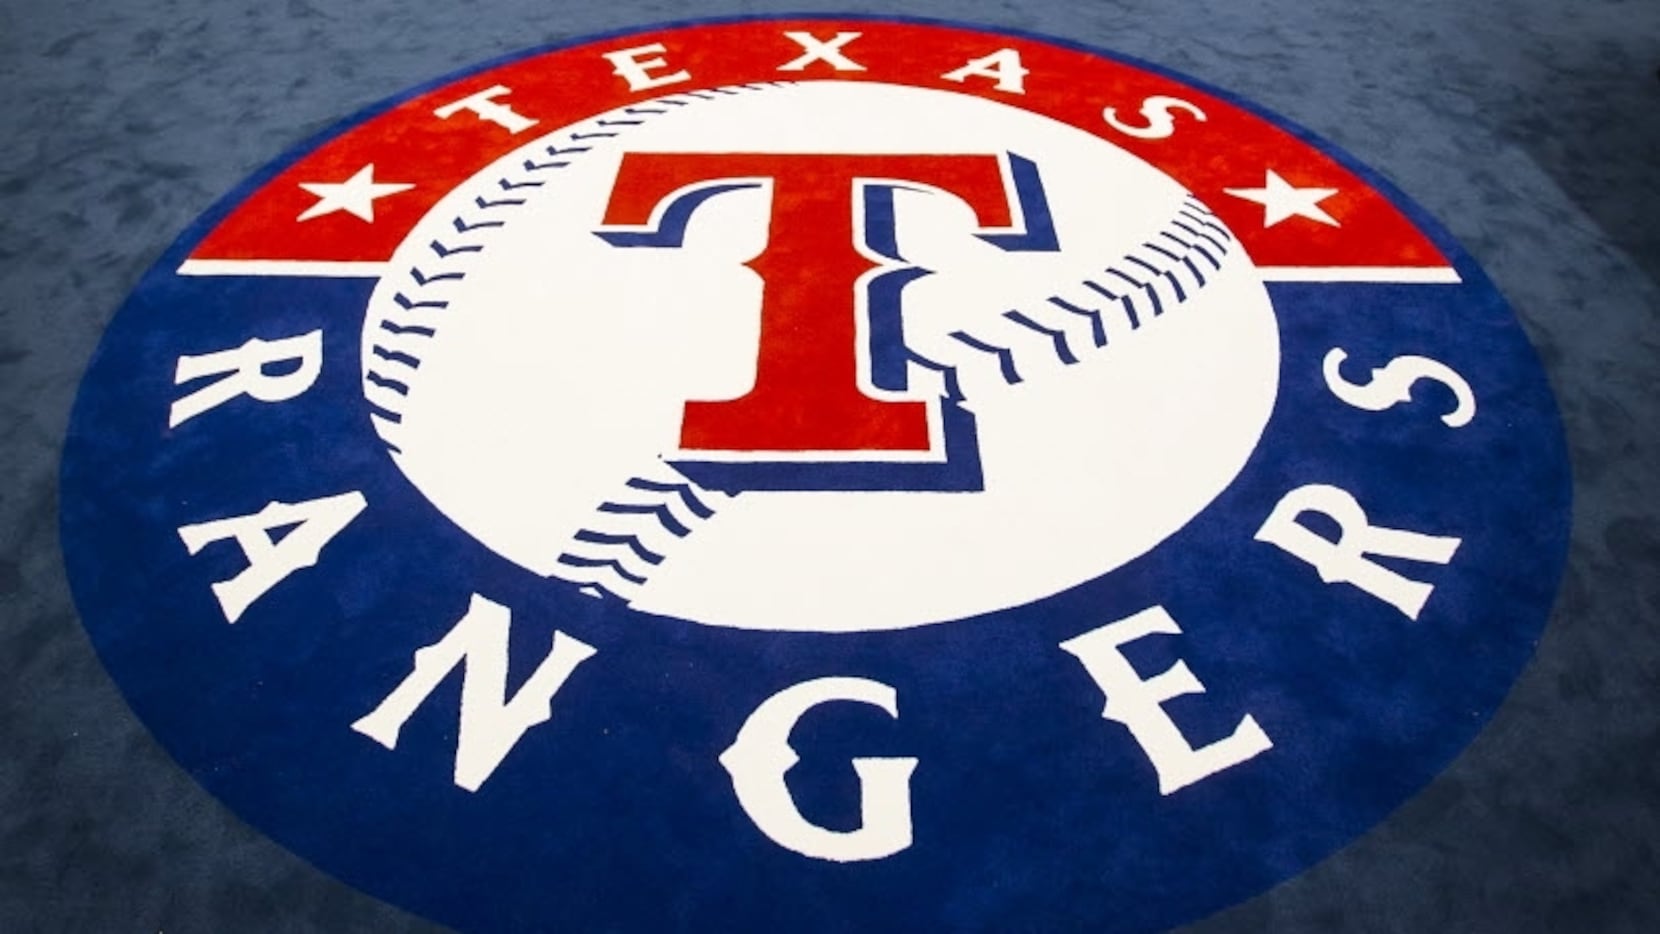 With 2023 No. 4 pick secured, Rangers come away with win from first MLB  draft lottery